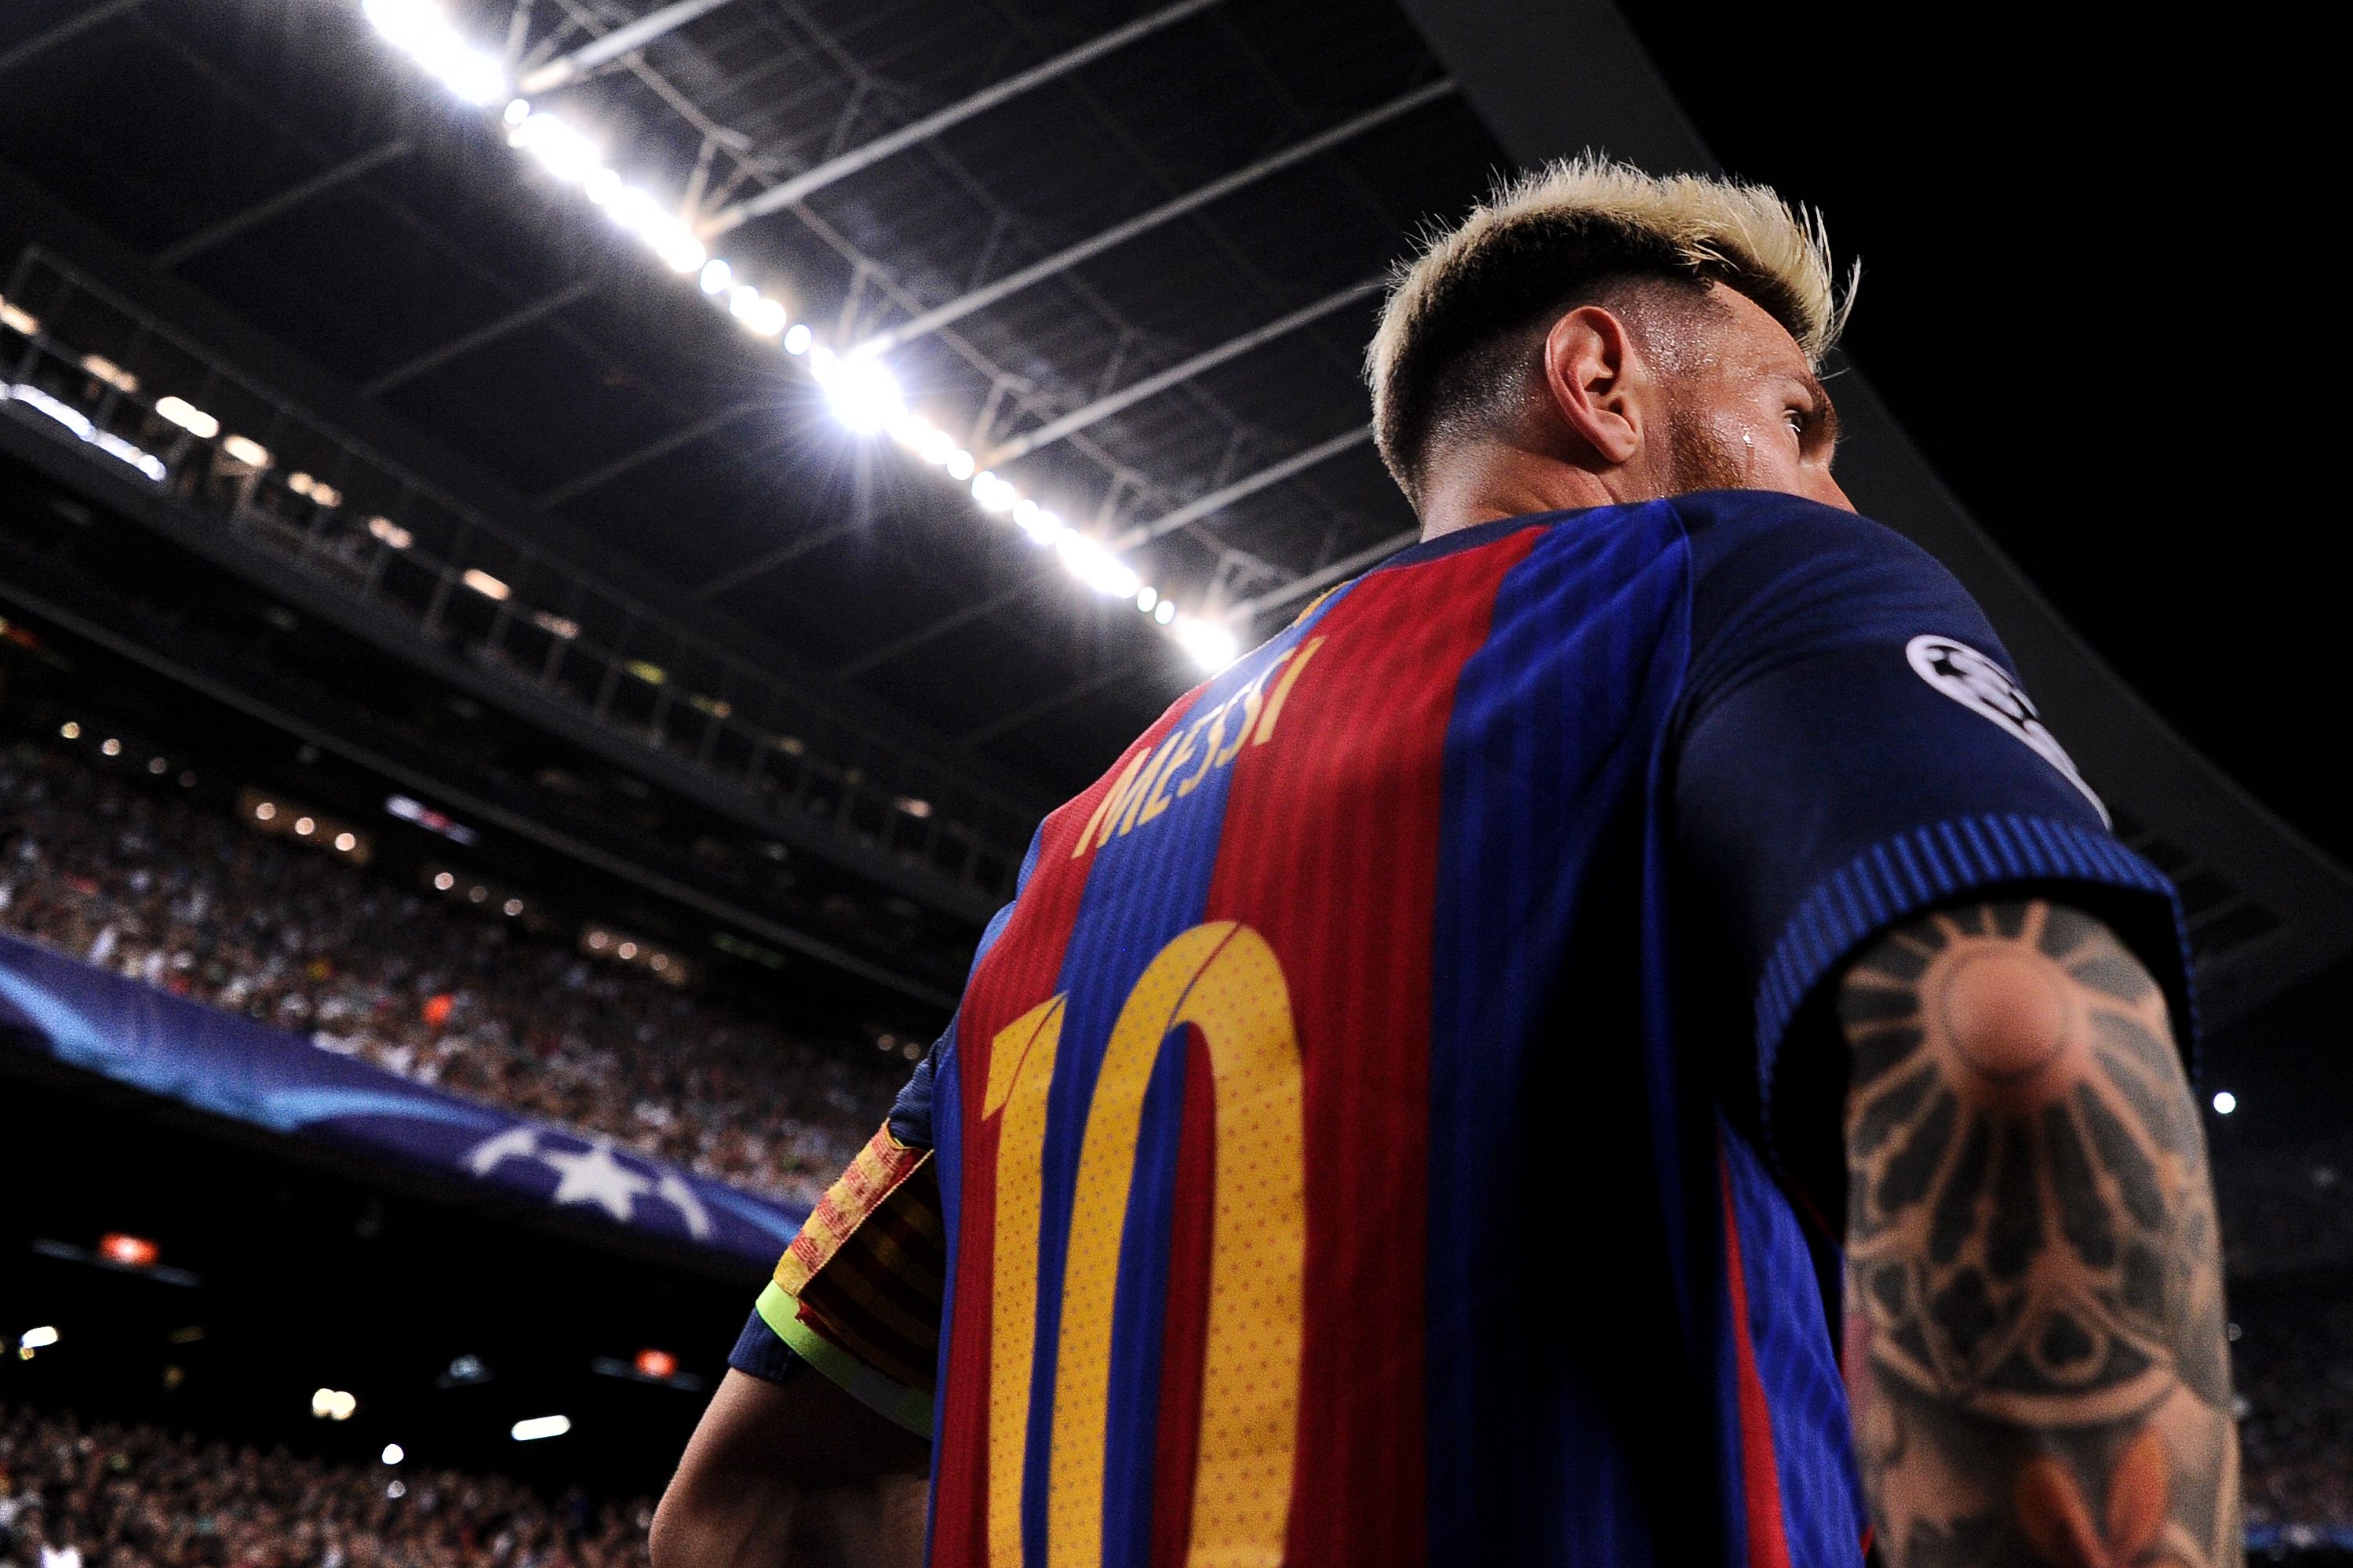 Barcelona's Argentinian forward Lionel Messi prepares to shoot a corner kick during the UEFA Champions League football match FC Barcelona vs Celtic FC at the Camp Nou stadium in Barcelona on September 13, 2016. / AFP / JOSEP LAGO        (Photo credit should read JOSEP LAGO/AFP/Getty Images)